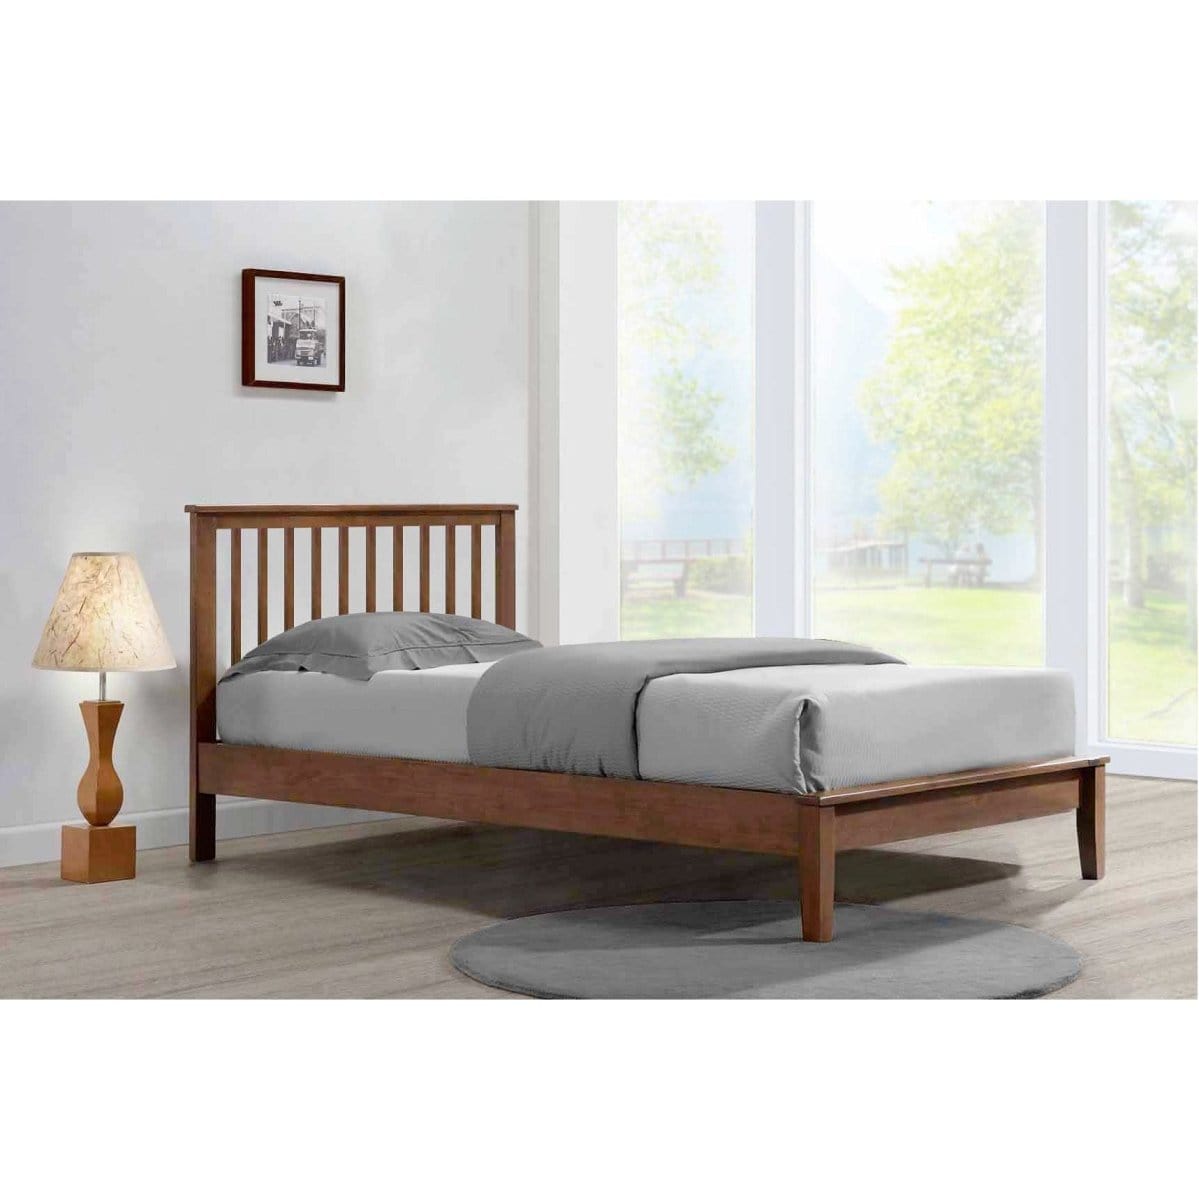 #1   Mission XII Solid Wood Single Bed picket and rail